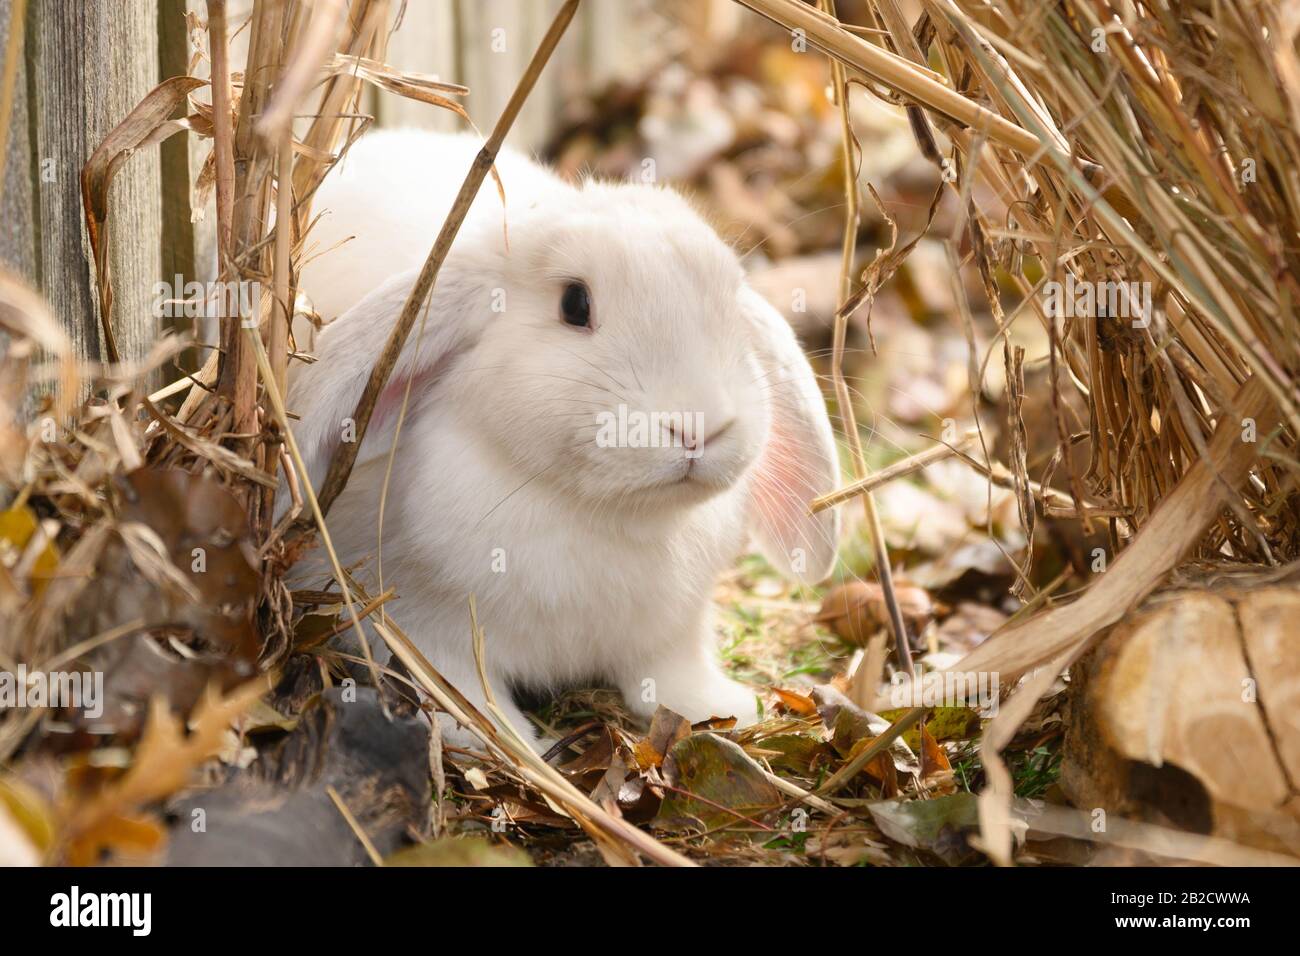 A white Holland lop rabbit stands on a ground. Stock Photo